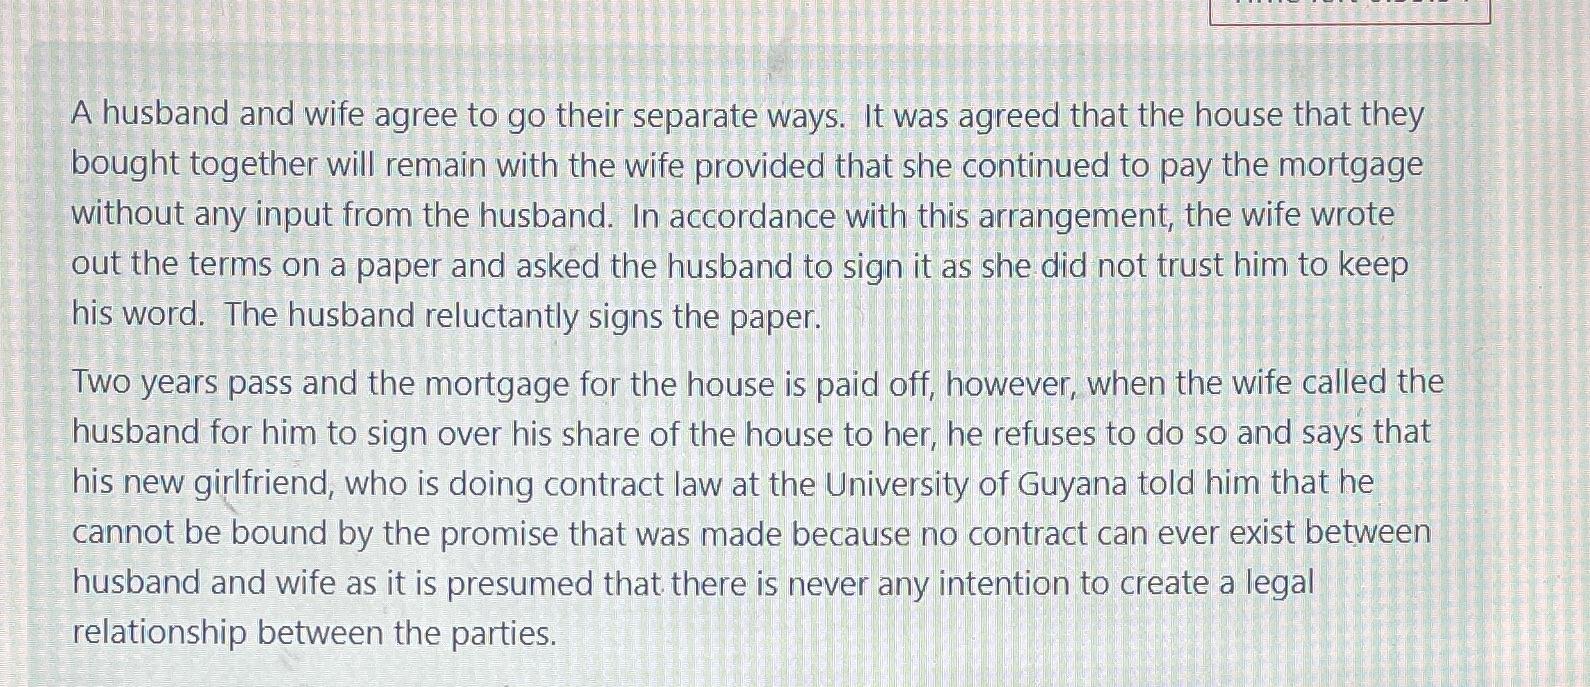 A husband and wife agree to go their separate ways. It was agreed that the house that they bought together